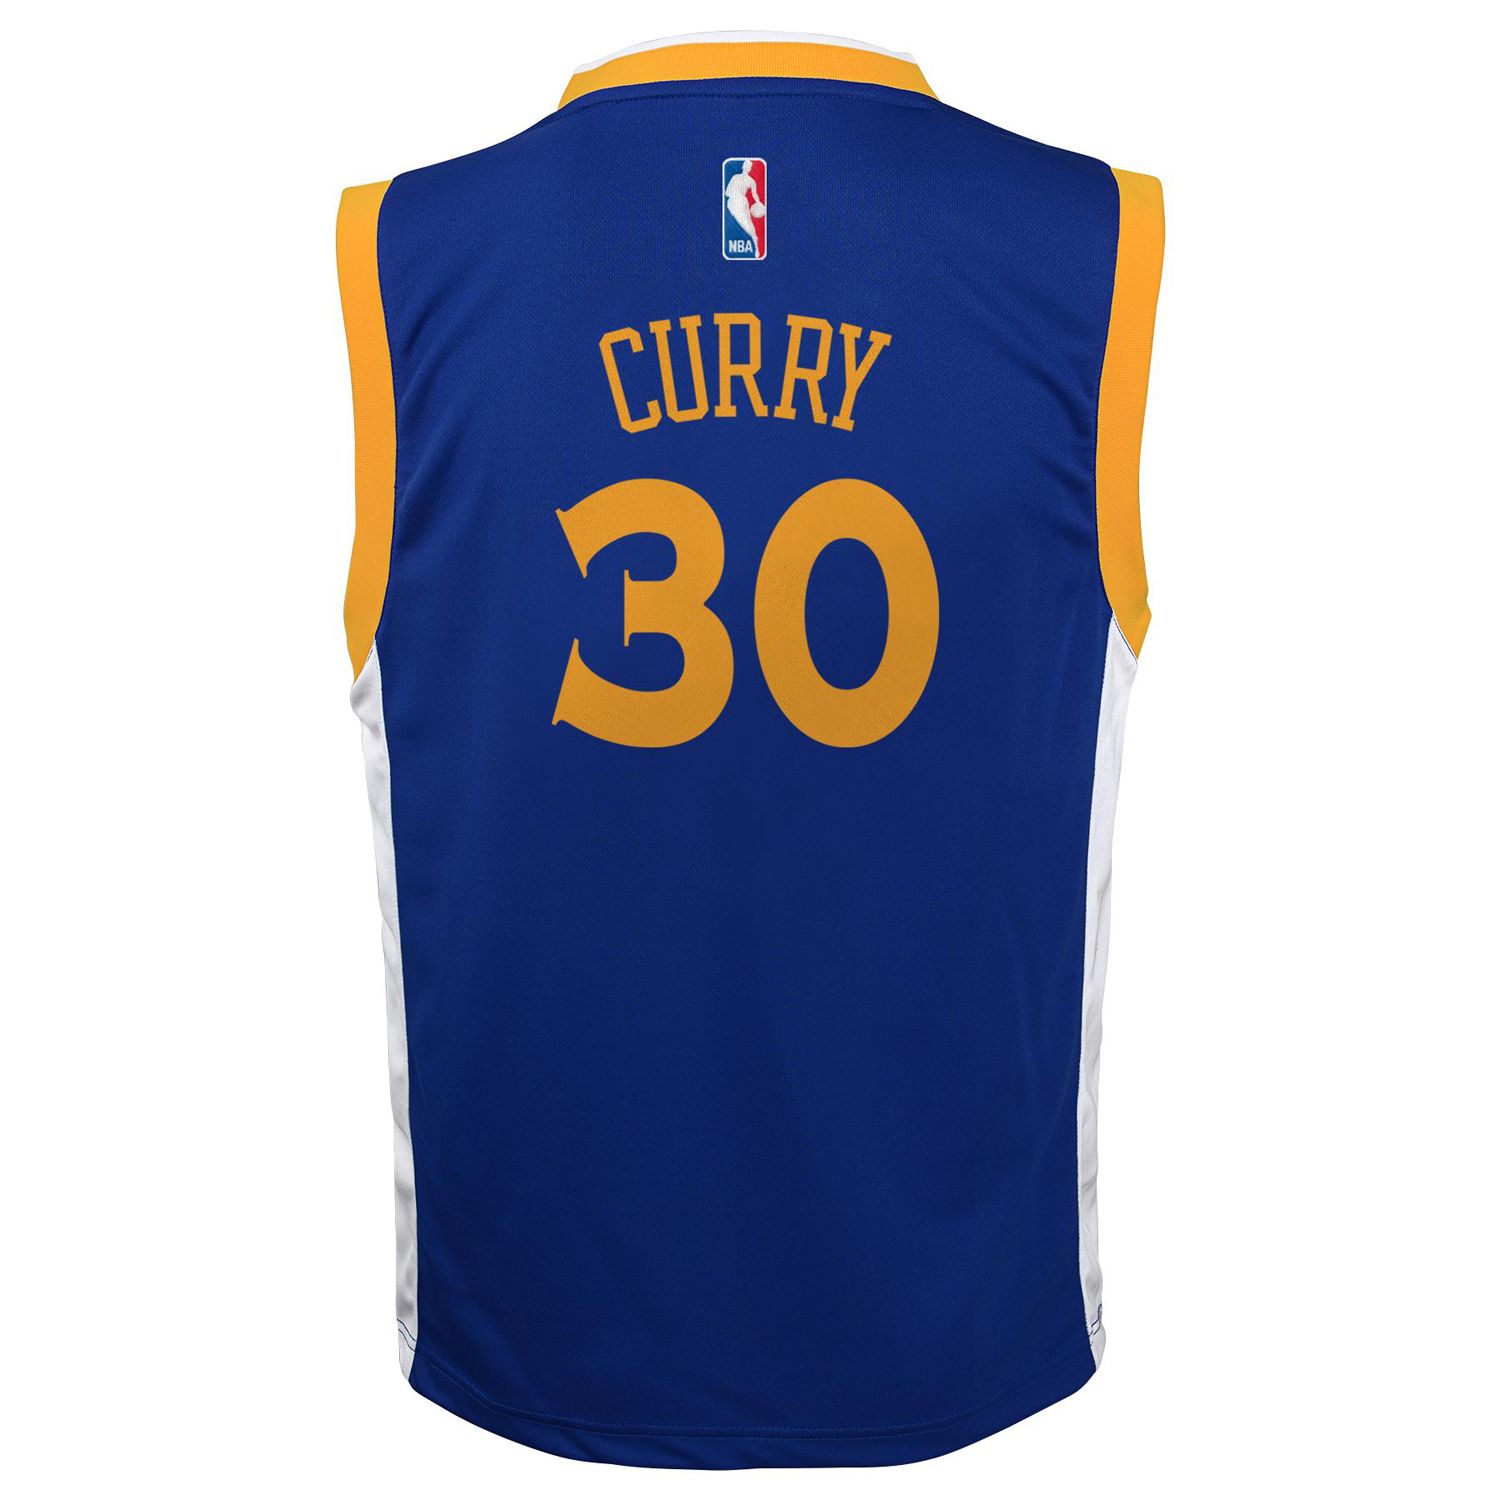 steph curry's jersey number